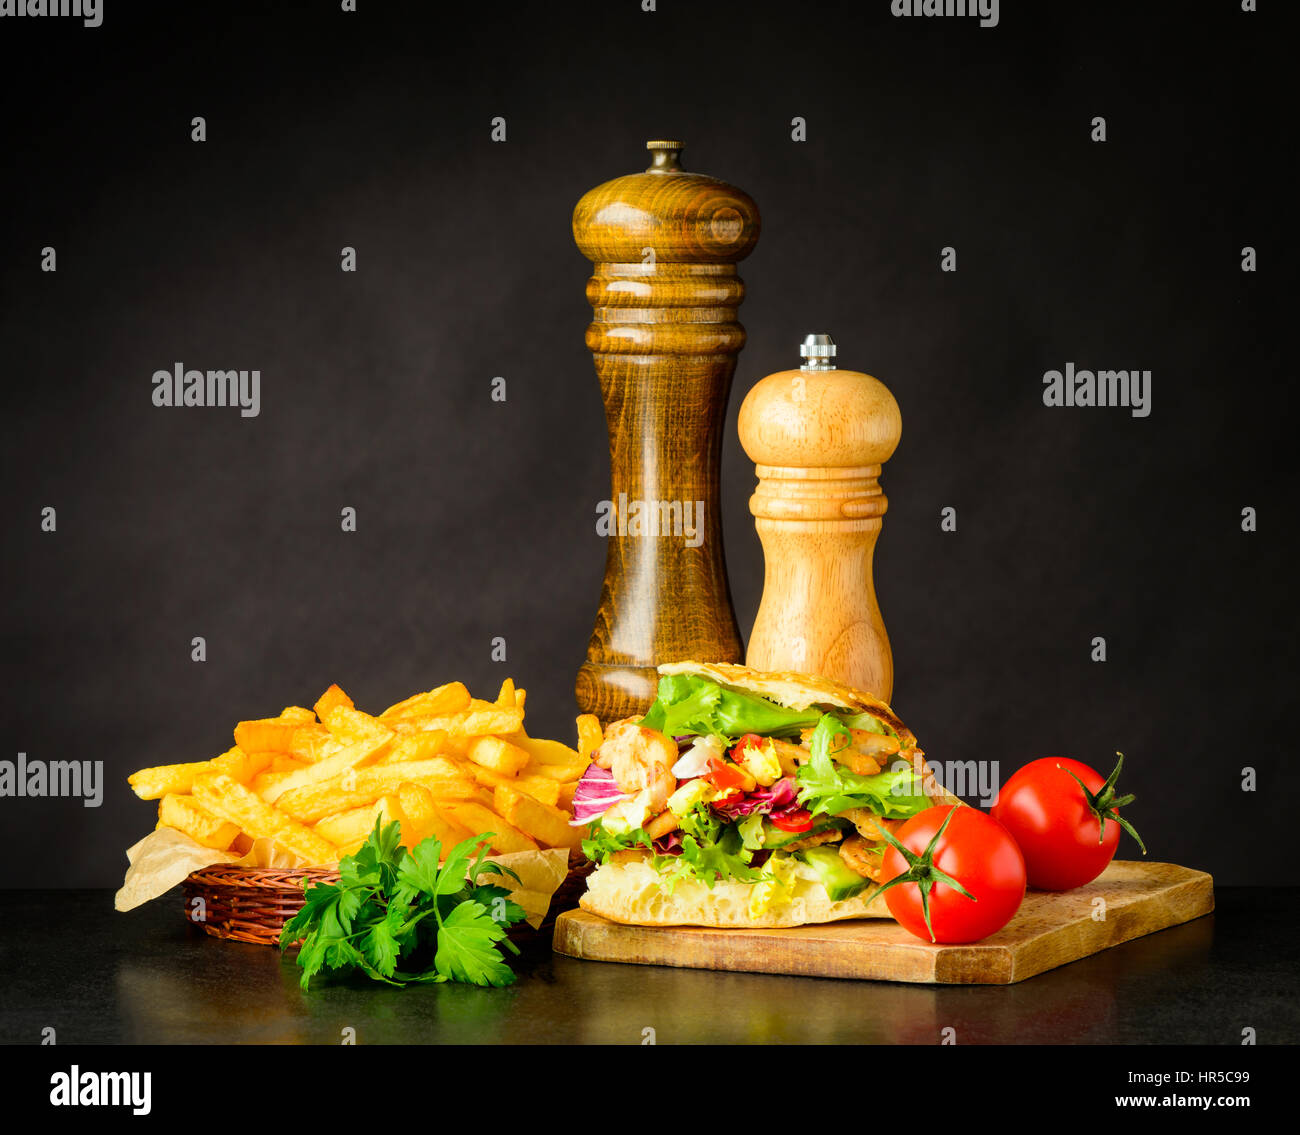 Doner Kebap Sandwich with French Fries and Fresh Vegetables Stock Photo